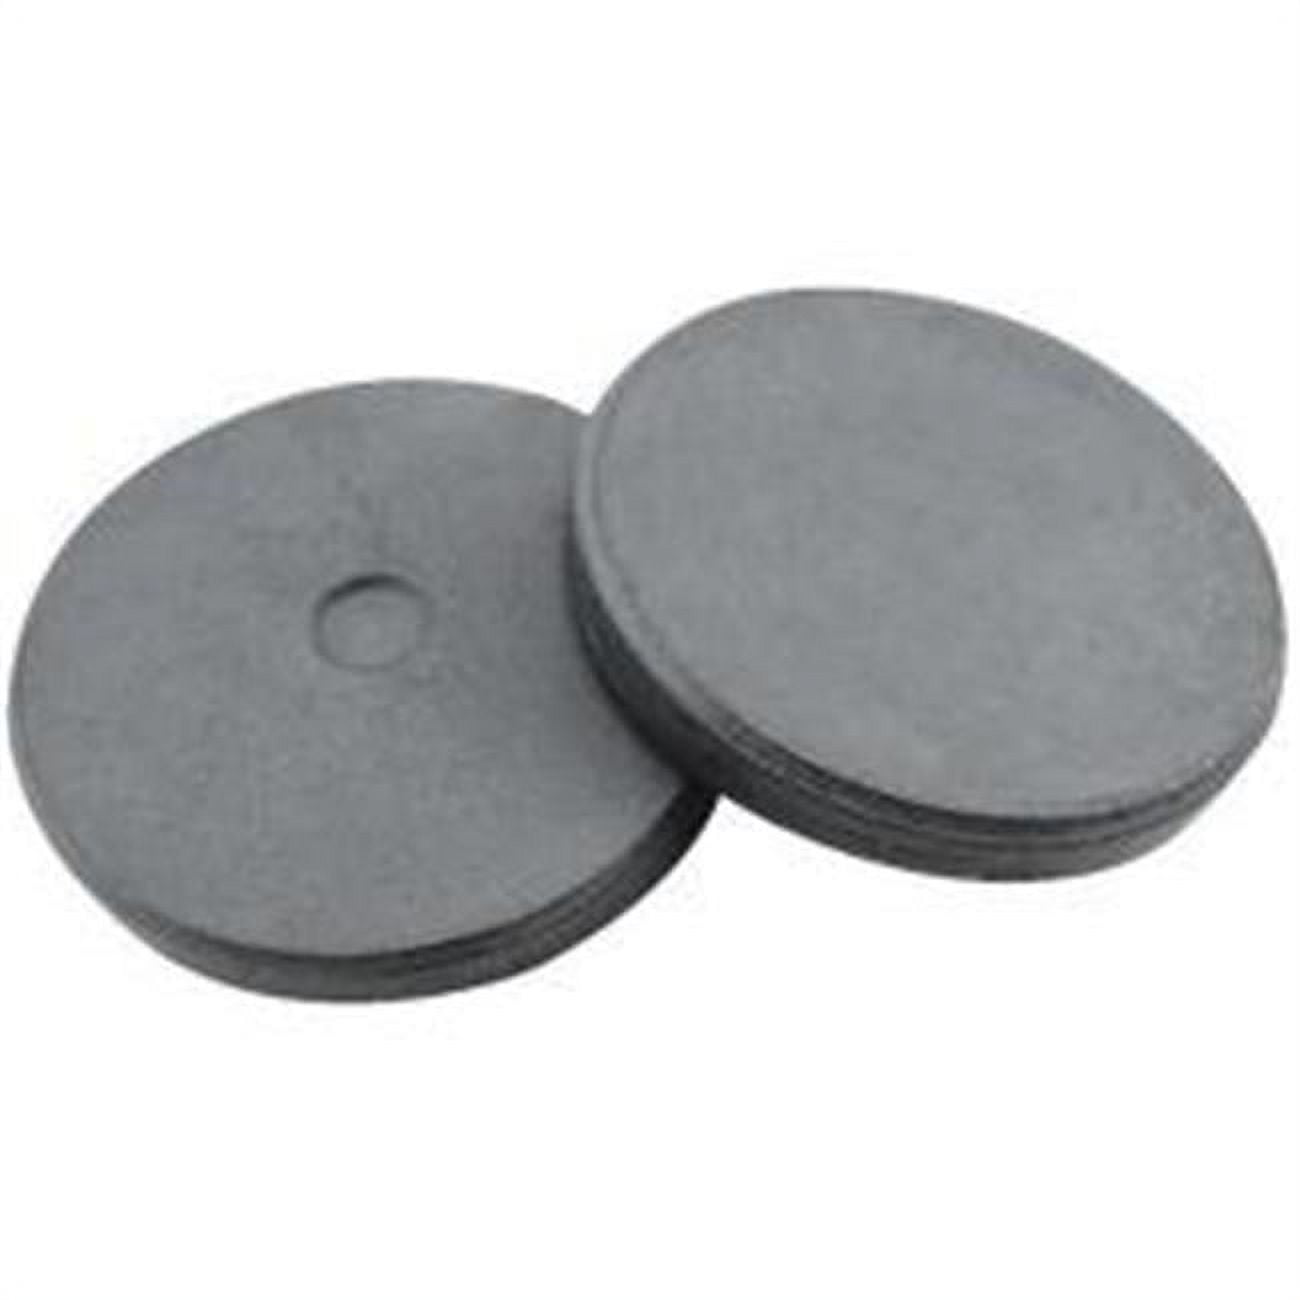 Picture of Master Magnetics 2108579 1.5 in. Ceramic Disc Magnets - Card of 2